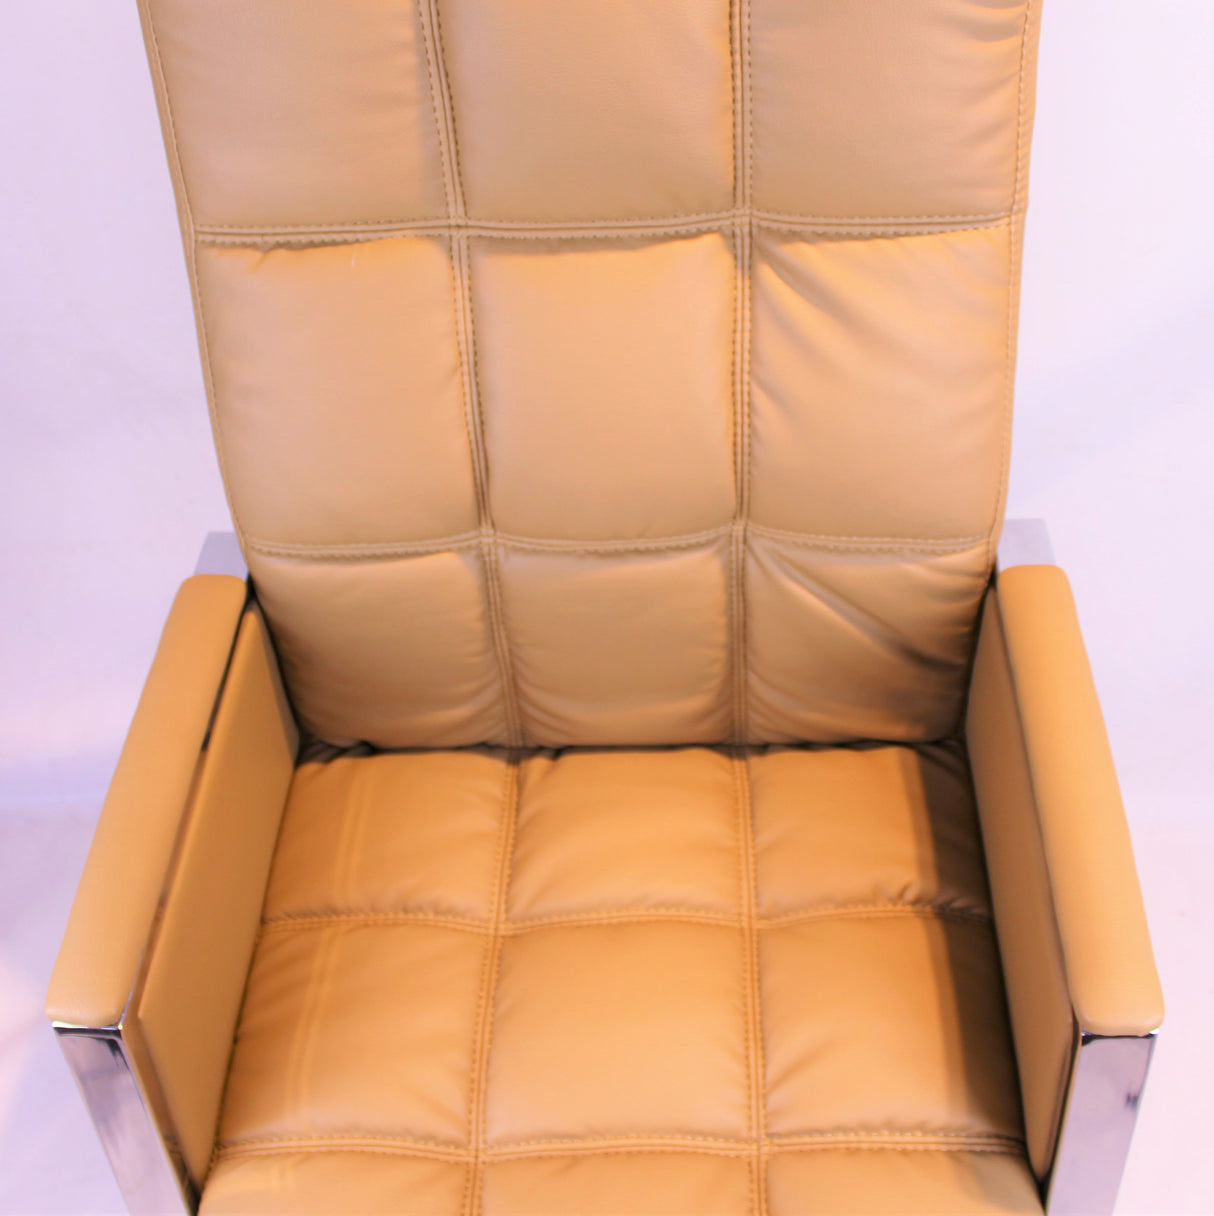 Beige Leather Stylish Visitors Chair - ZV-B310